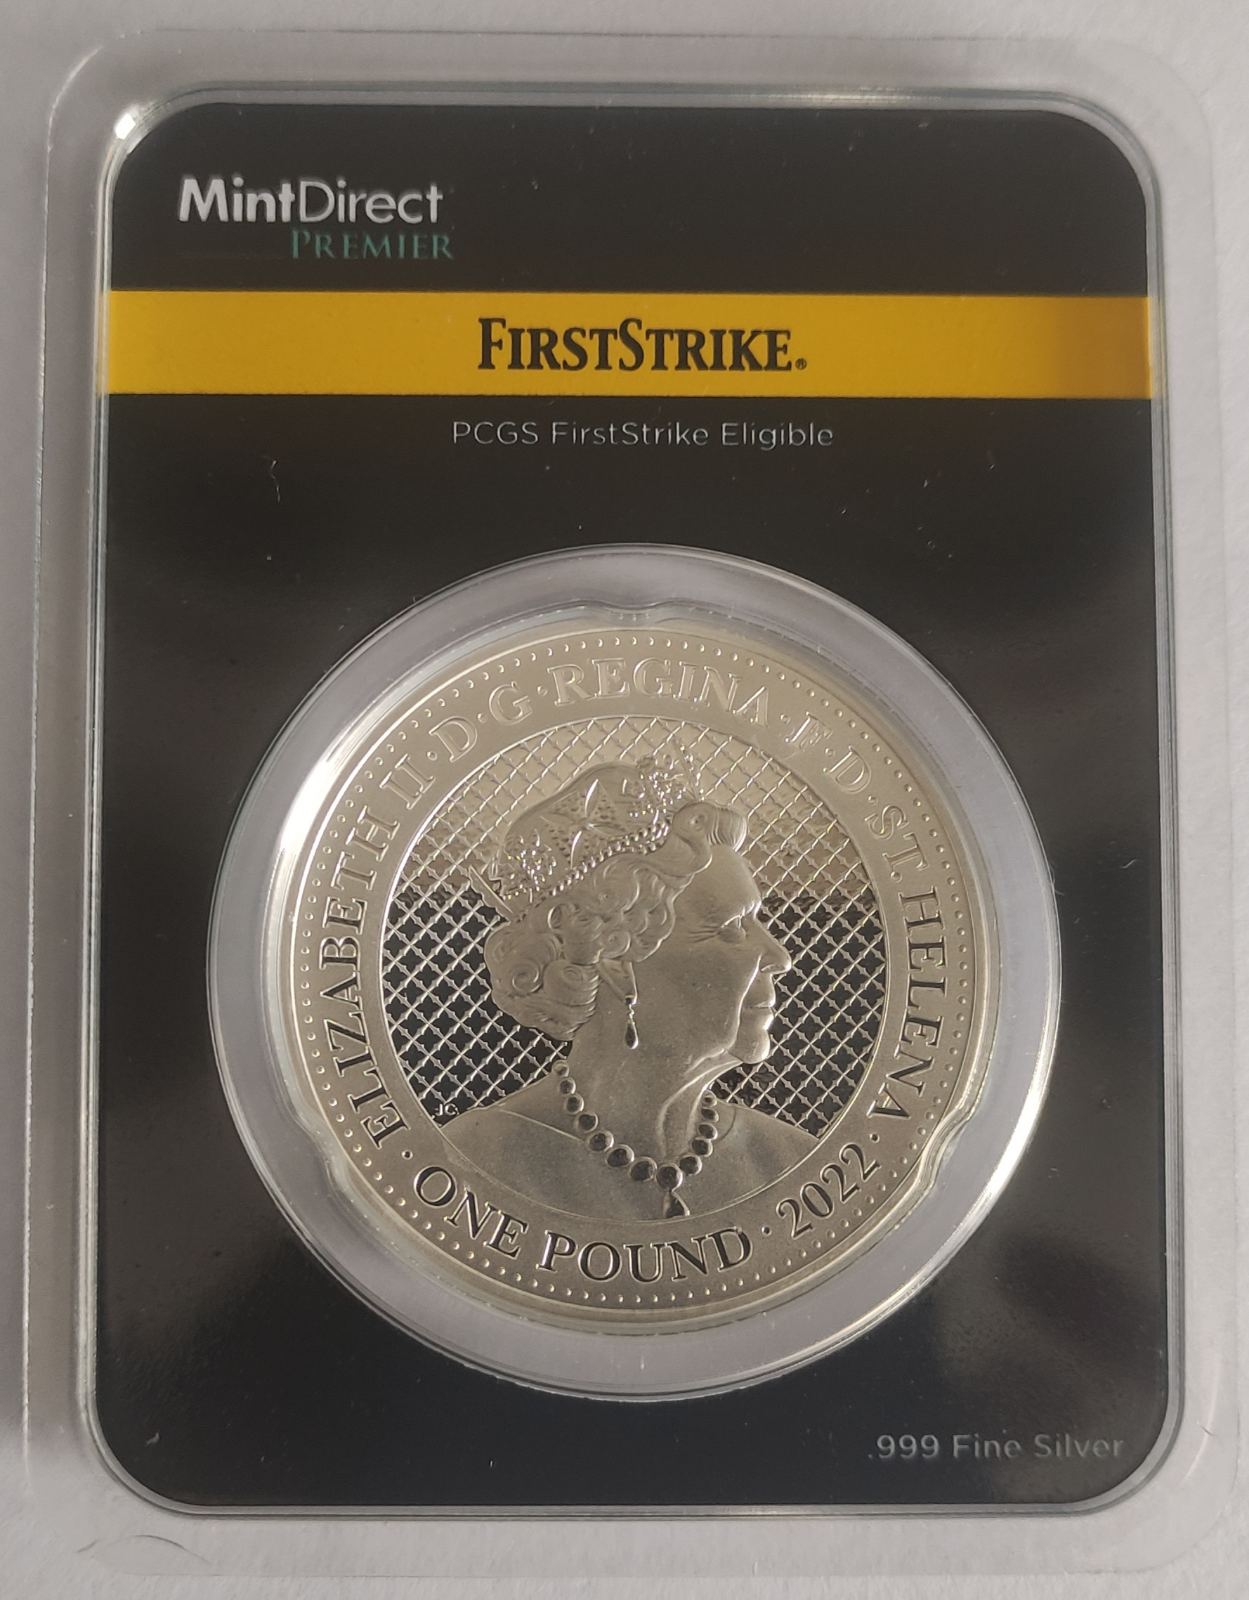 2022 St. Helena Cash Series: Rhino 1 oz Silver Coin in MintDirect Premier Packaging + FirstStrike Eligible